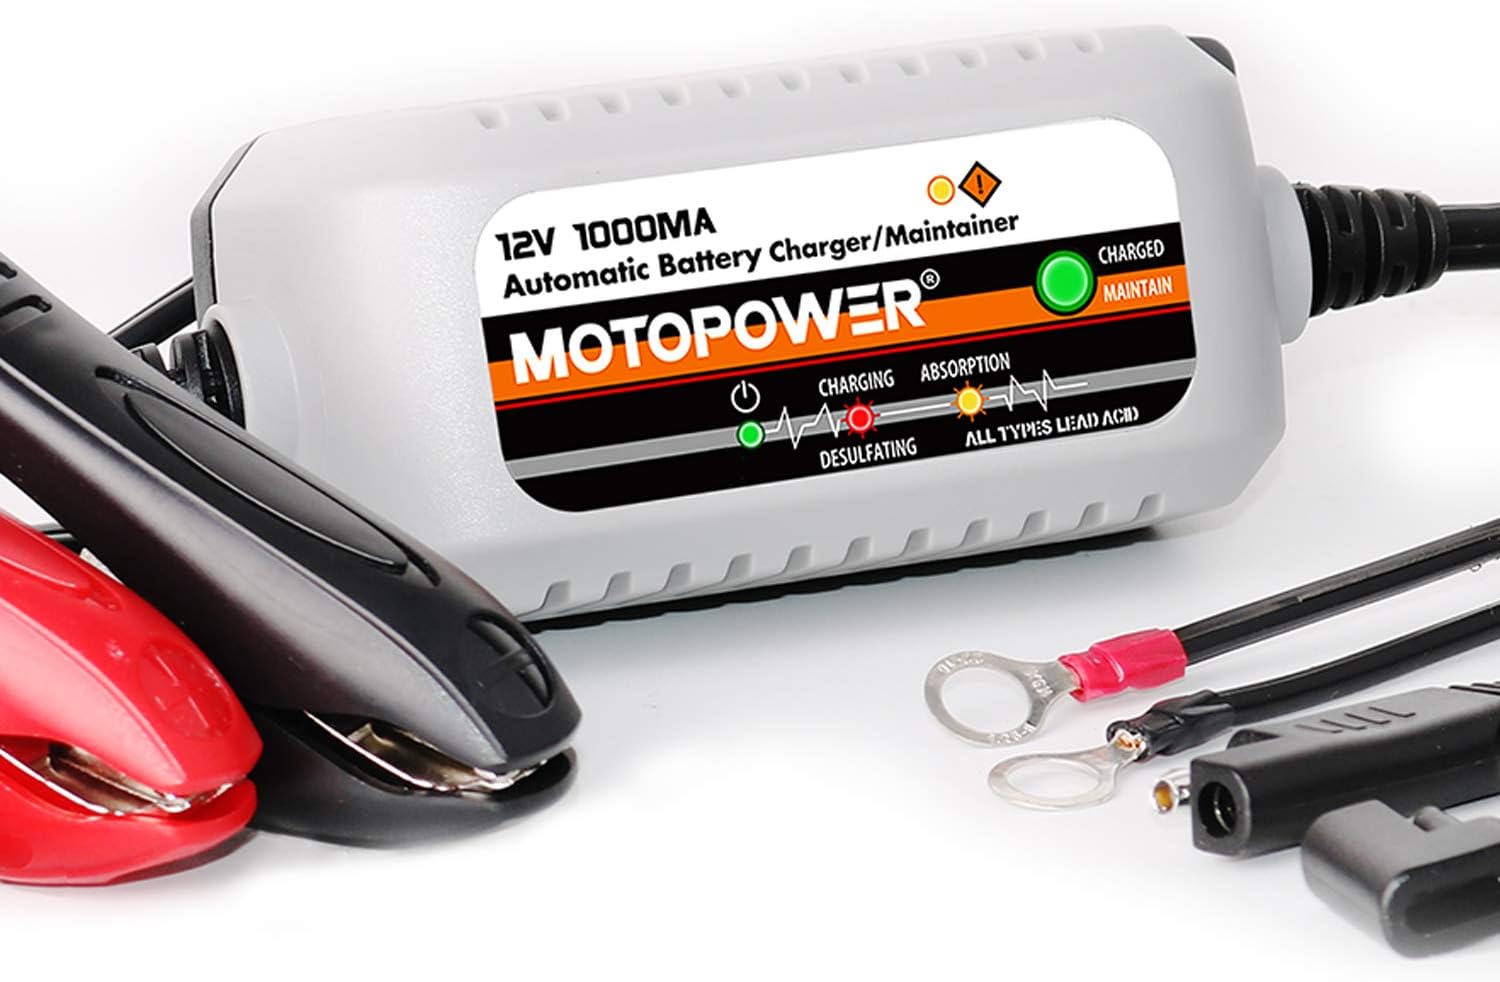 MOTOPOWER MP00205B 12V 1000mA Automatic Battery Charger, Battery Maintainer, Trickle Charger, and Battery Desulfator with Timer Protection - Grey - MOTOPOWER MP00205B Charger Review